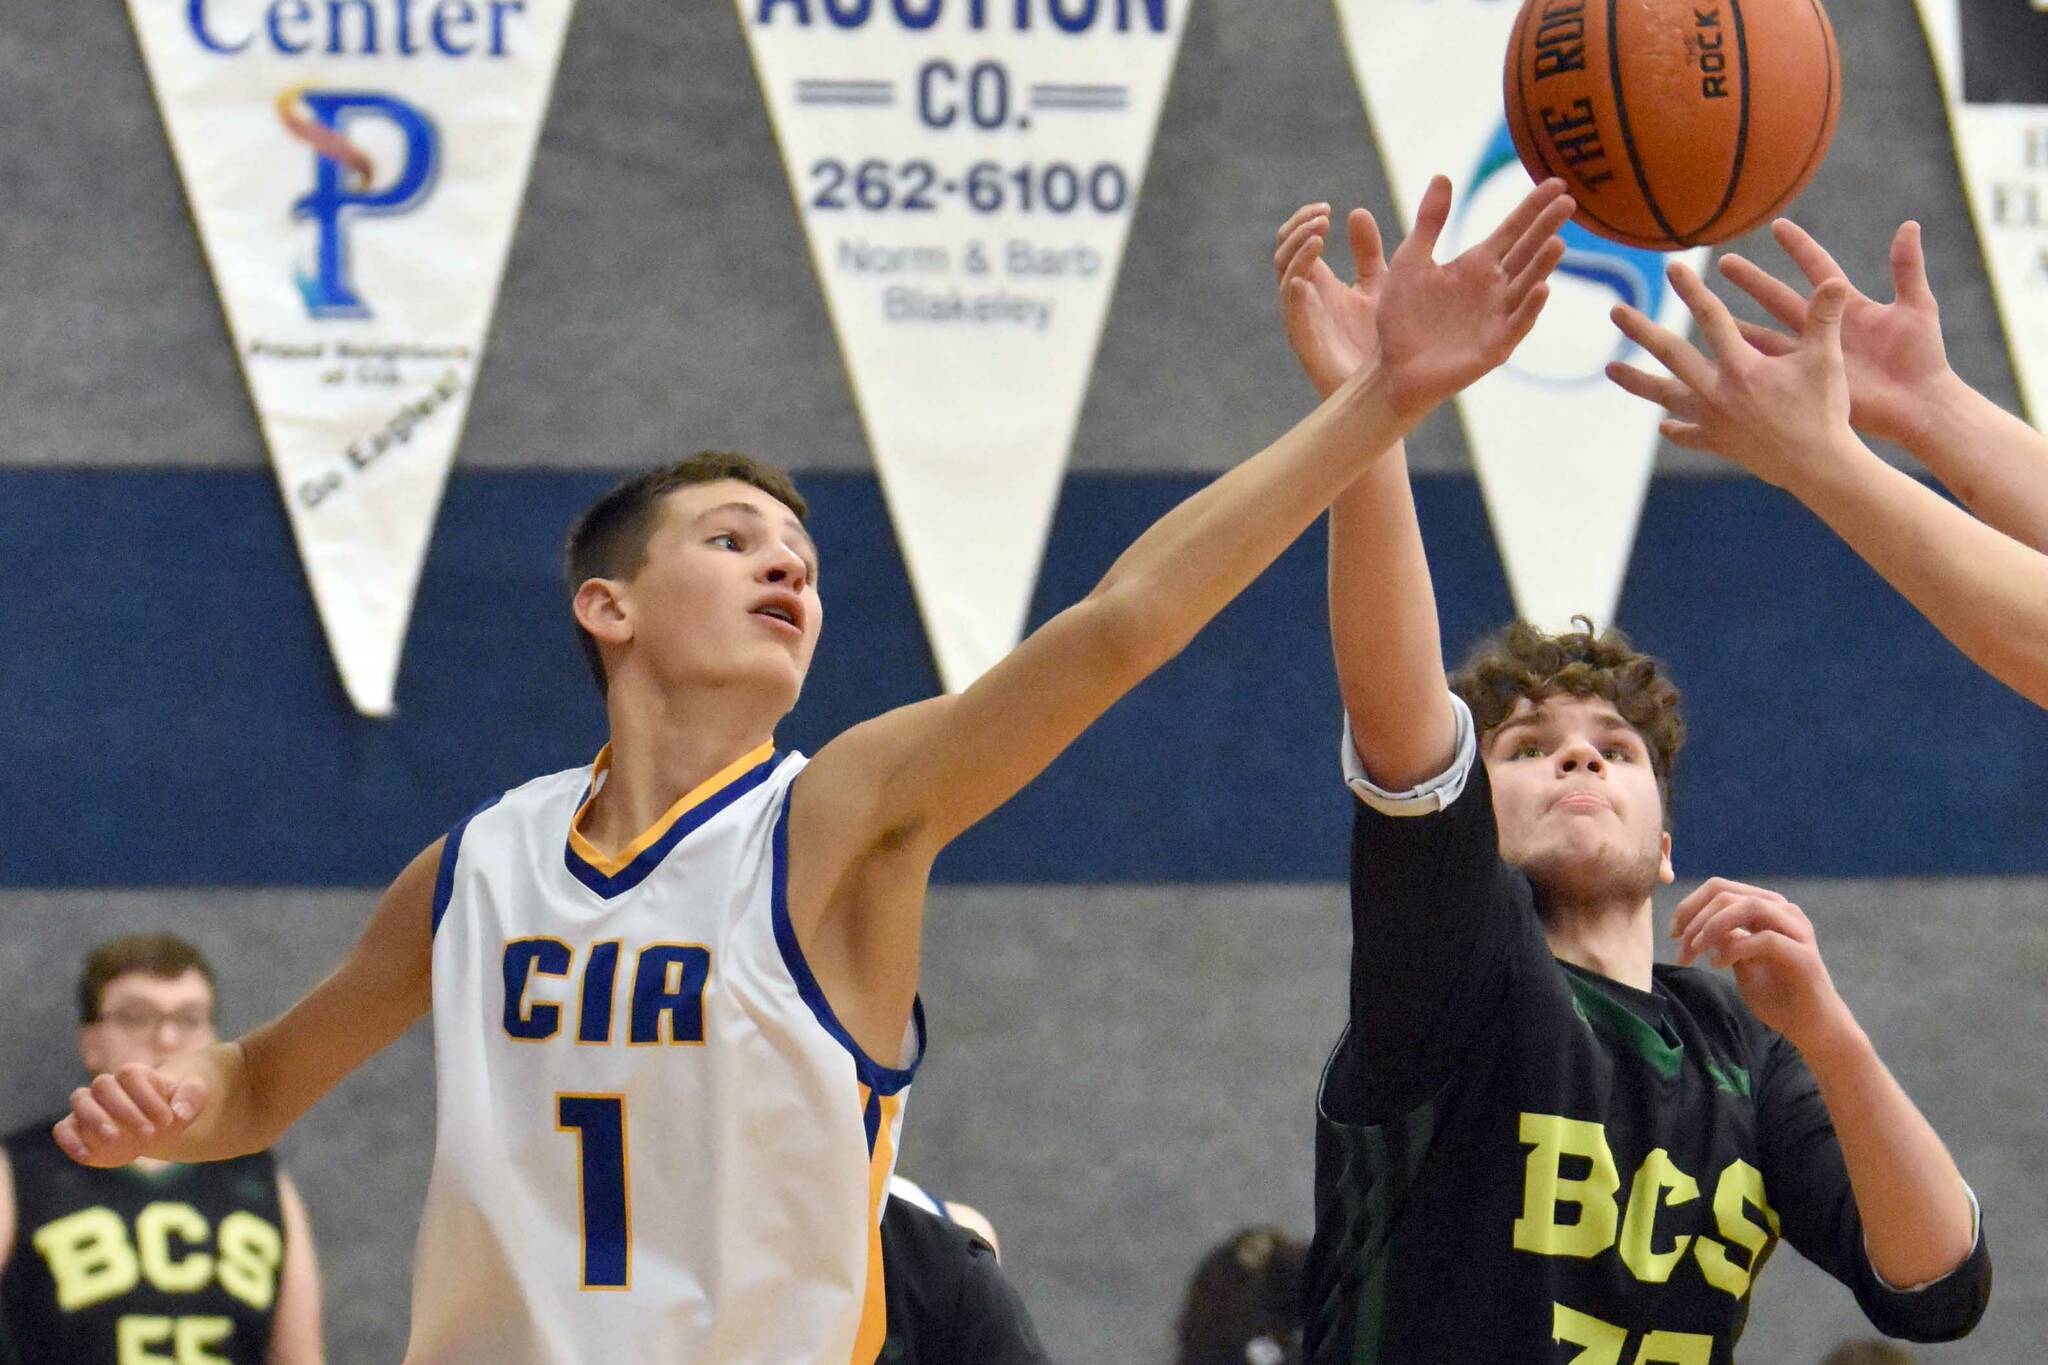 Cook Inlet Academy's Alek McGarry battles for a rebound against Birchwood Christian on Saturday, Jan. 21, 2023, at Cook Inlet Academy just outside of Soldotna, Alaska. (Photo by Jeff Helminiak/Peninsula Clarion)